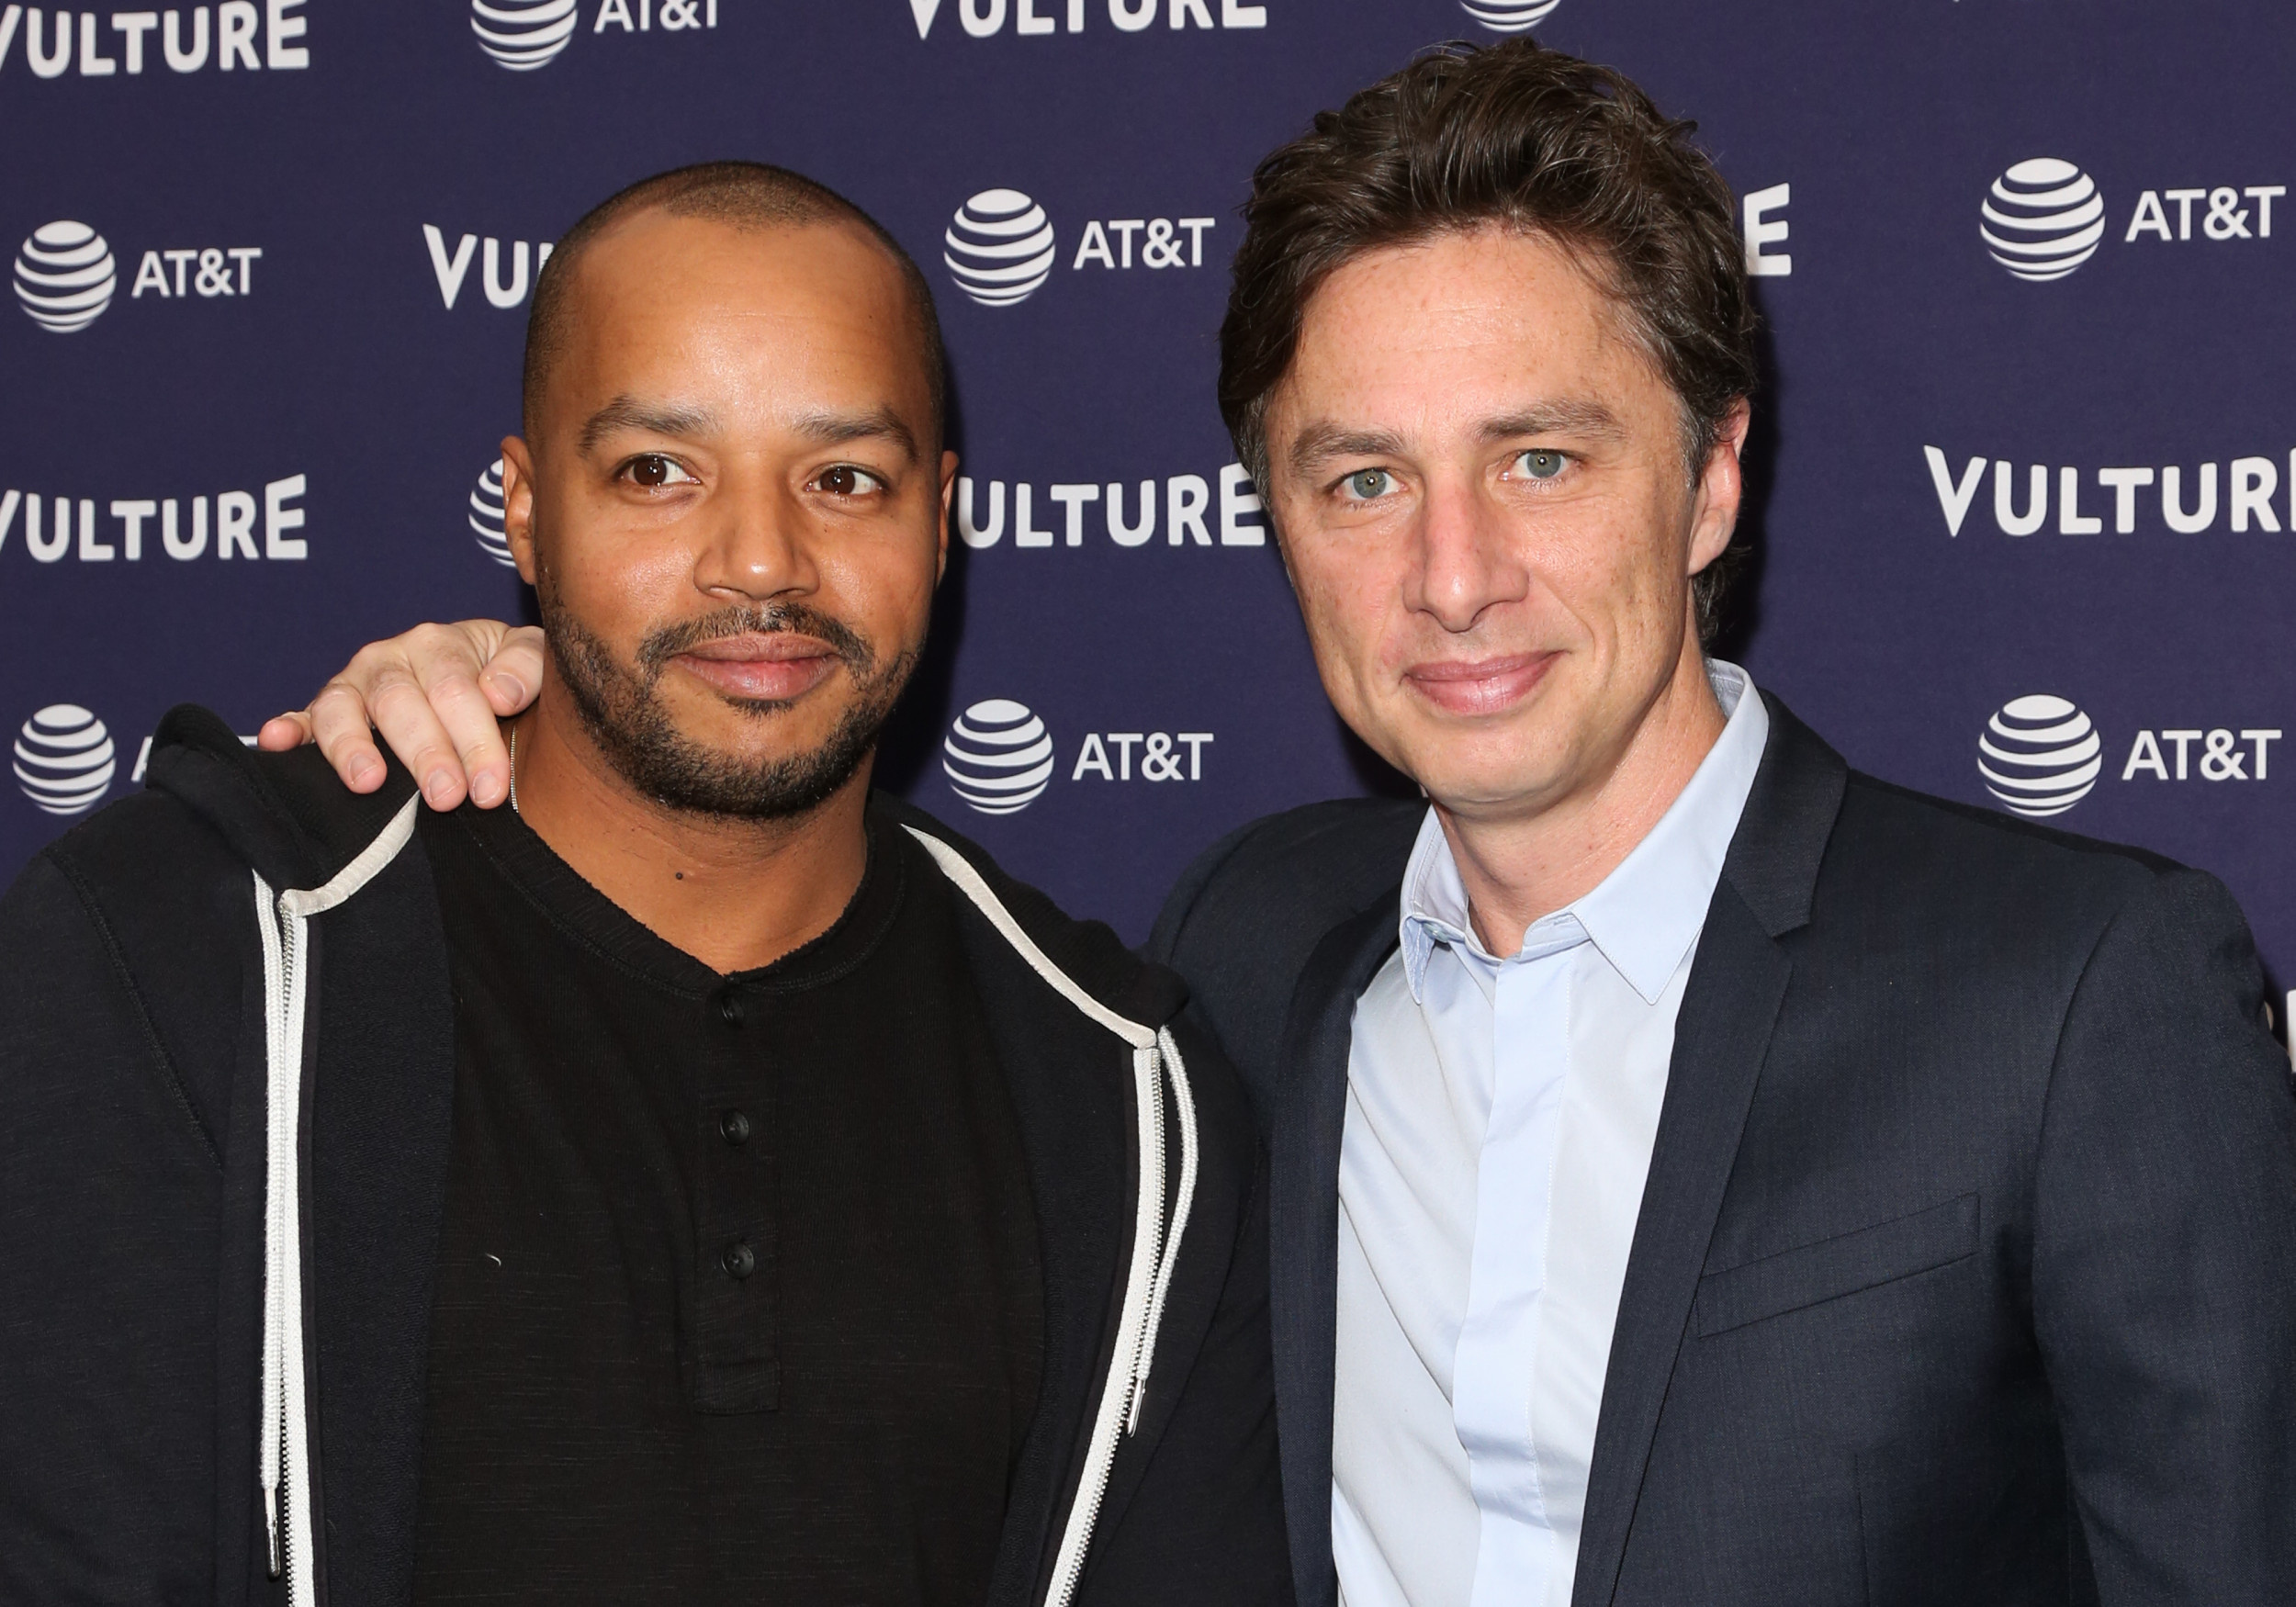 Donald Faison: Zach Braff, Celebrity Family Feud, The actors of the leading roles in Scrubs. 2500x1750 HD Wallpaper.